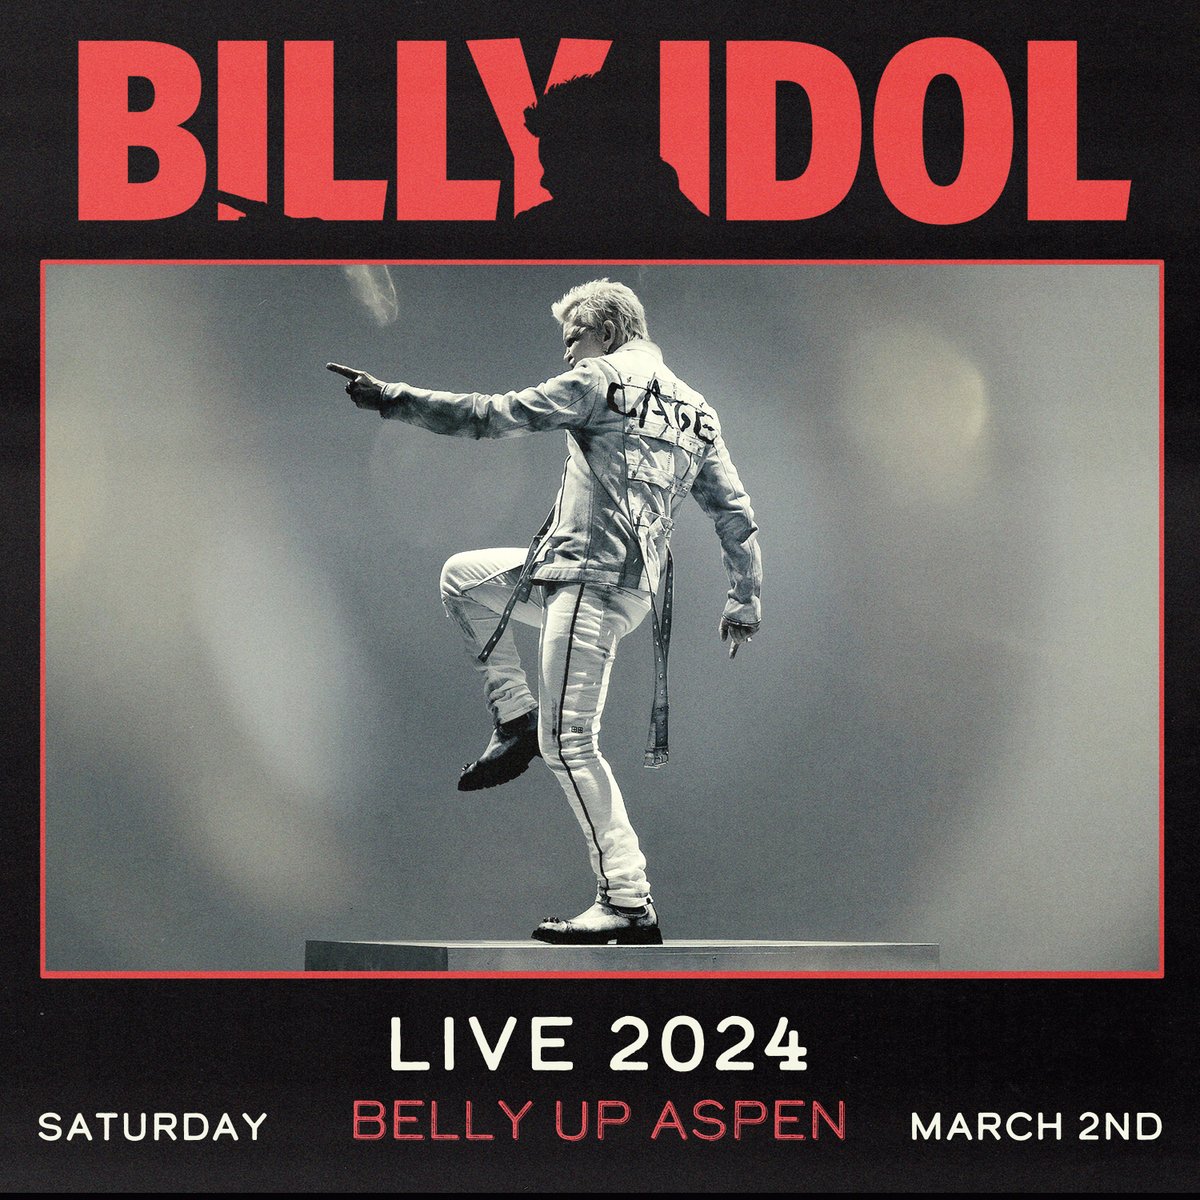 Rock legend @BillyIdol debuts Saturday, 3/2! Presale starts Thu, 12/14 @ 10am MT. Sign up by 8:30am MT on 12/14 to receive the presale code: bit.ly/3MSARpt